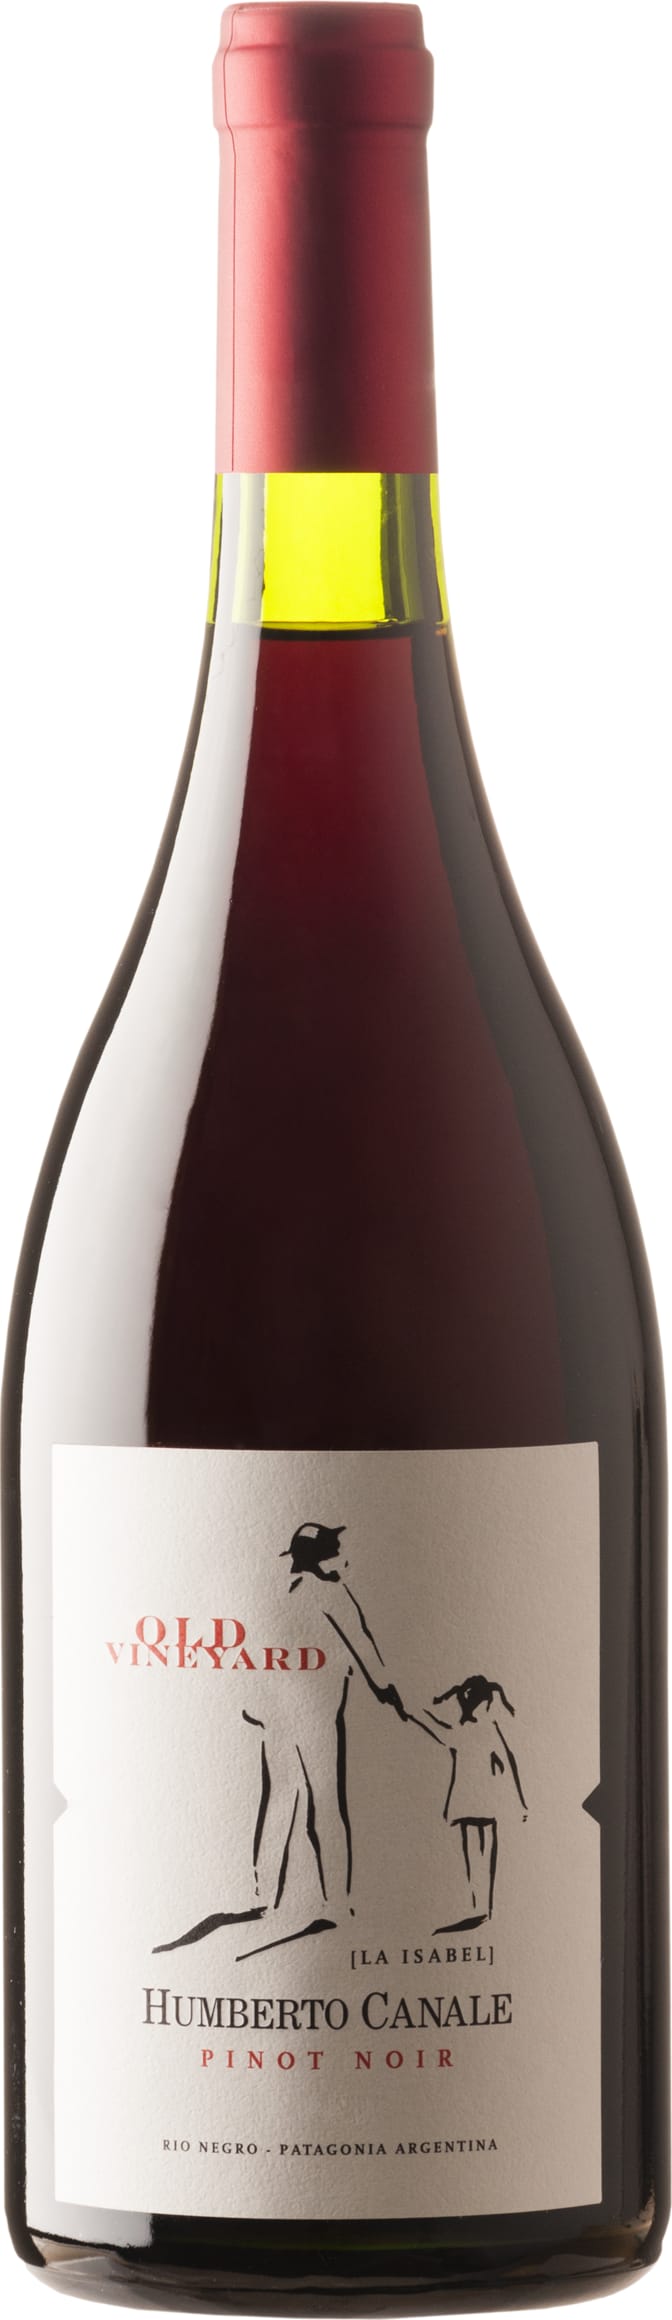 Old Vine Pinot Noir 22 Humb Canale 75cl - Buy Humberto Canale Wines from GREAT WINES DIRECT wine shop